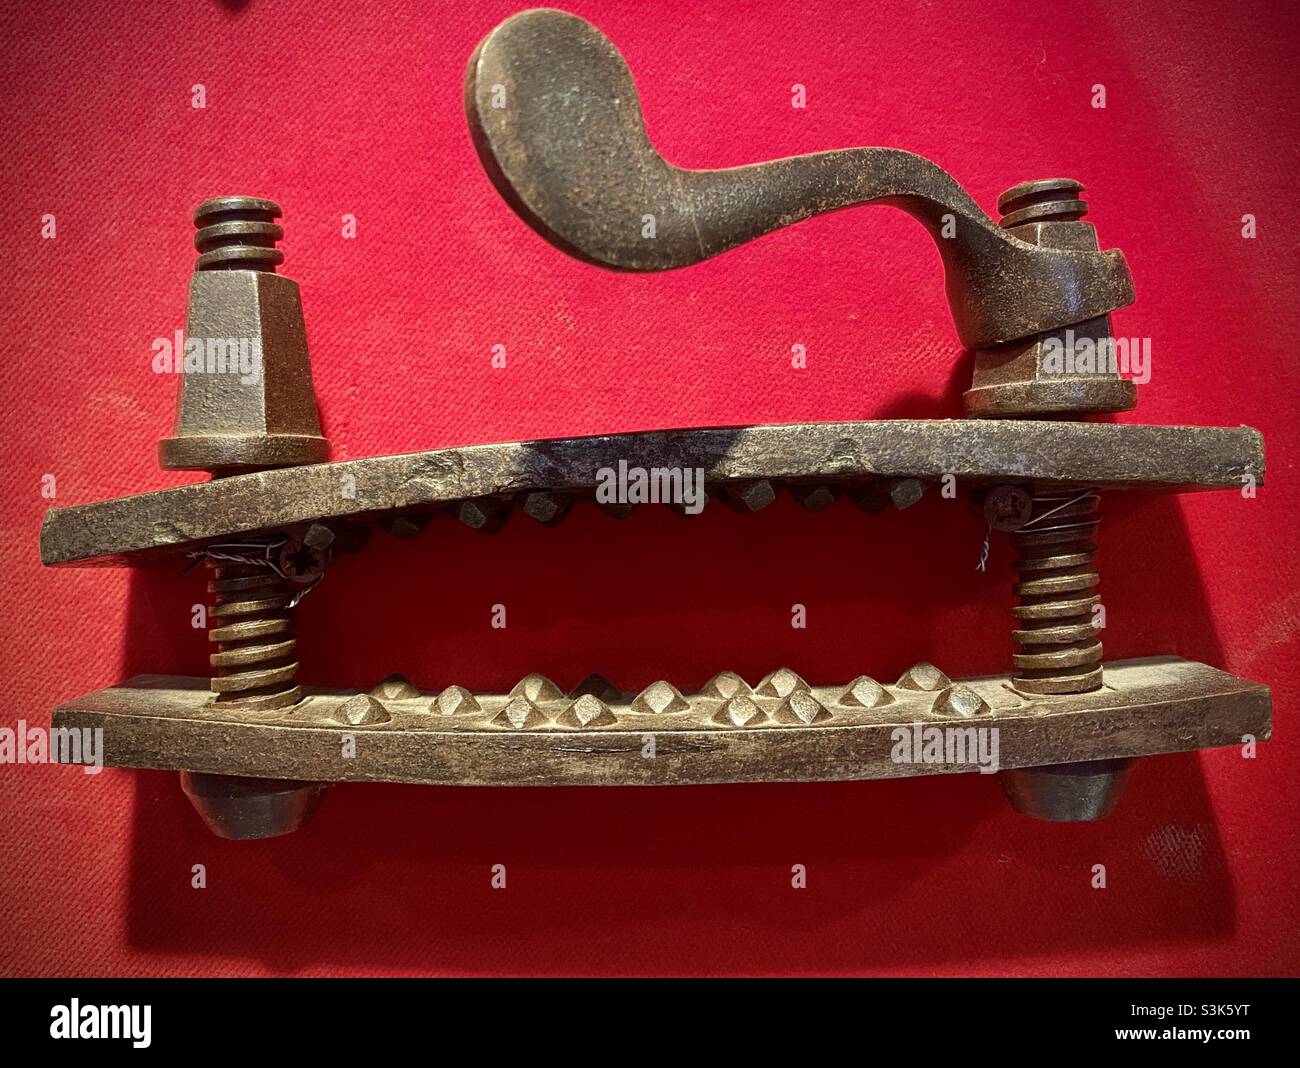 Thumbscrew, a medieval torture device. Stock Photo